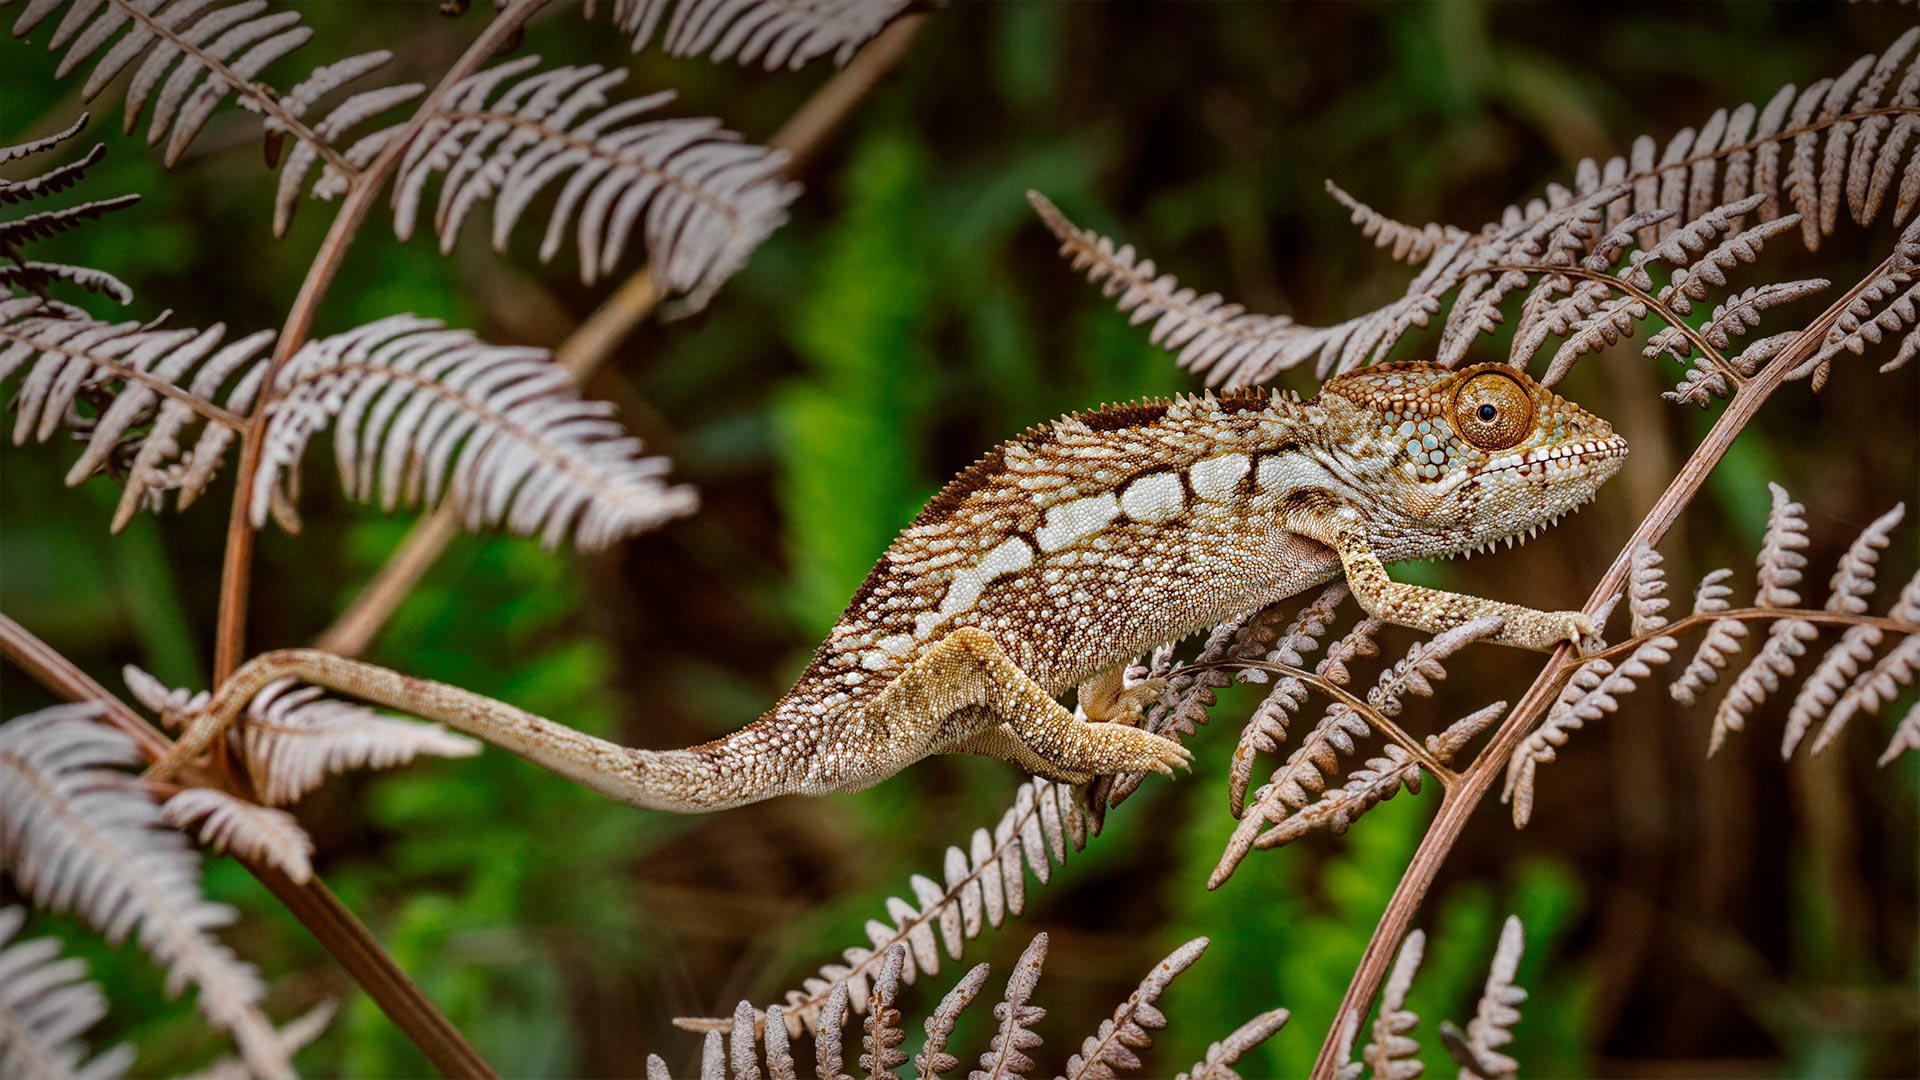 Panther chameleon in Amber Mountain National Park, Madagascar - Christian Ziegler